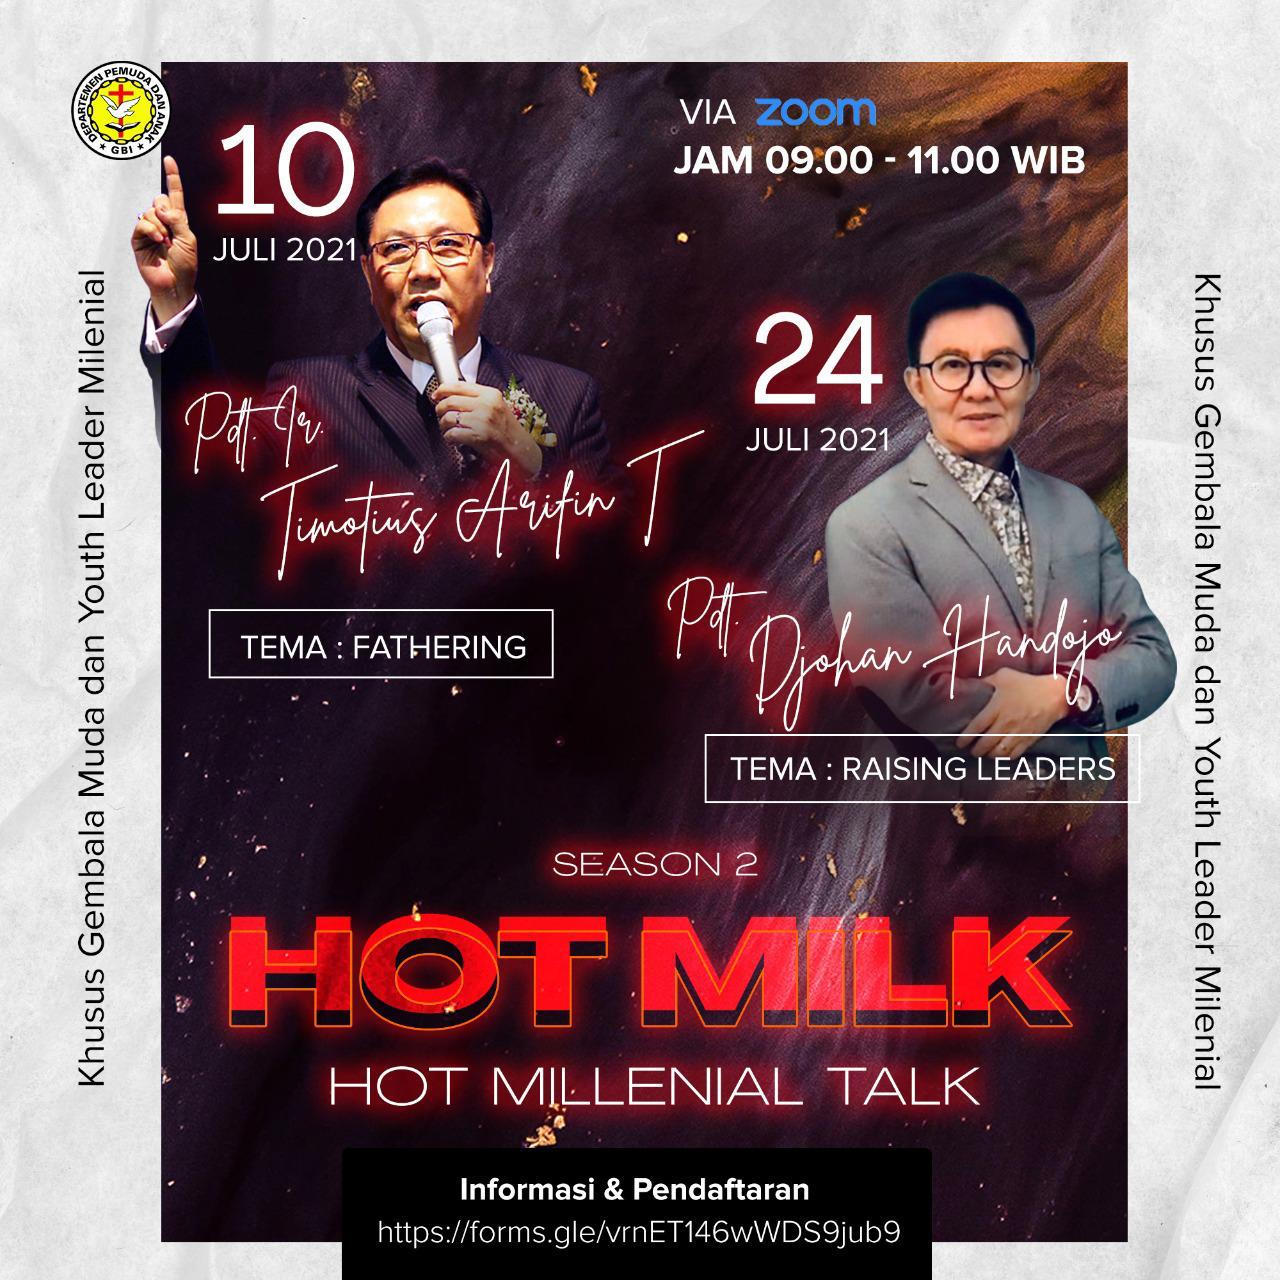 You are currently viewing HOT MILENIAL TALK Session 2.